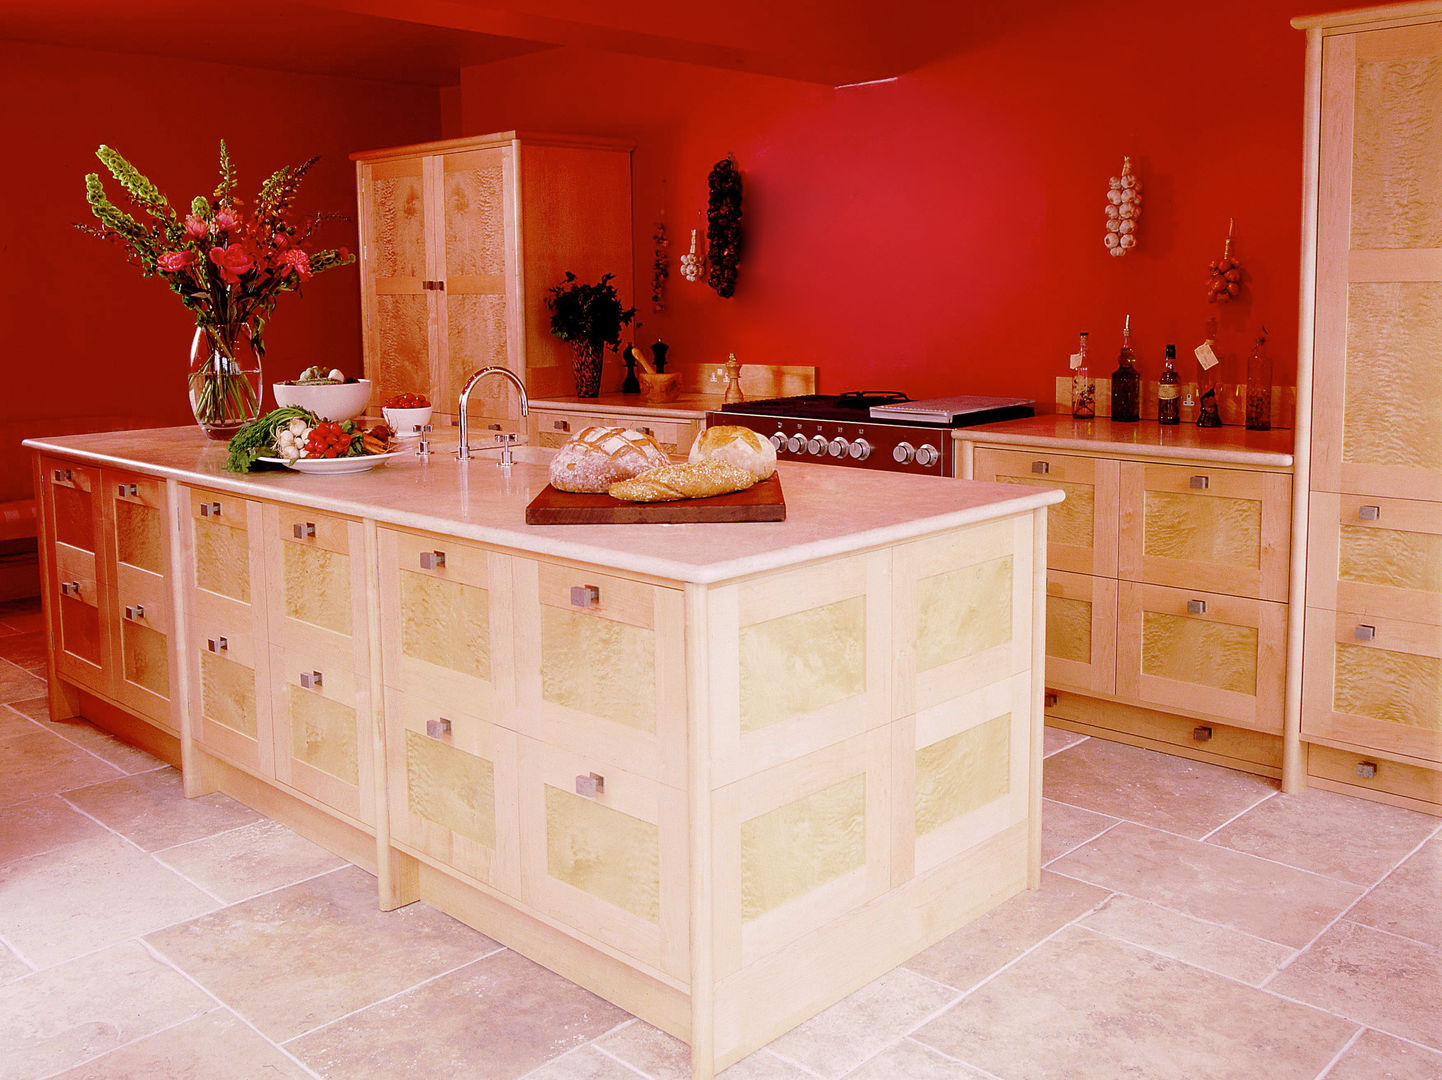 Quilted Maple Kitchen with Red Wall designed and made by Tim Wood Tim Wood Limited Modern Mutfak Dolap & Raflar